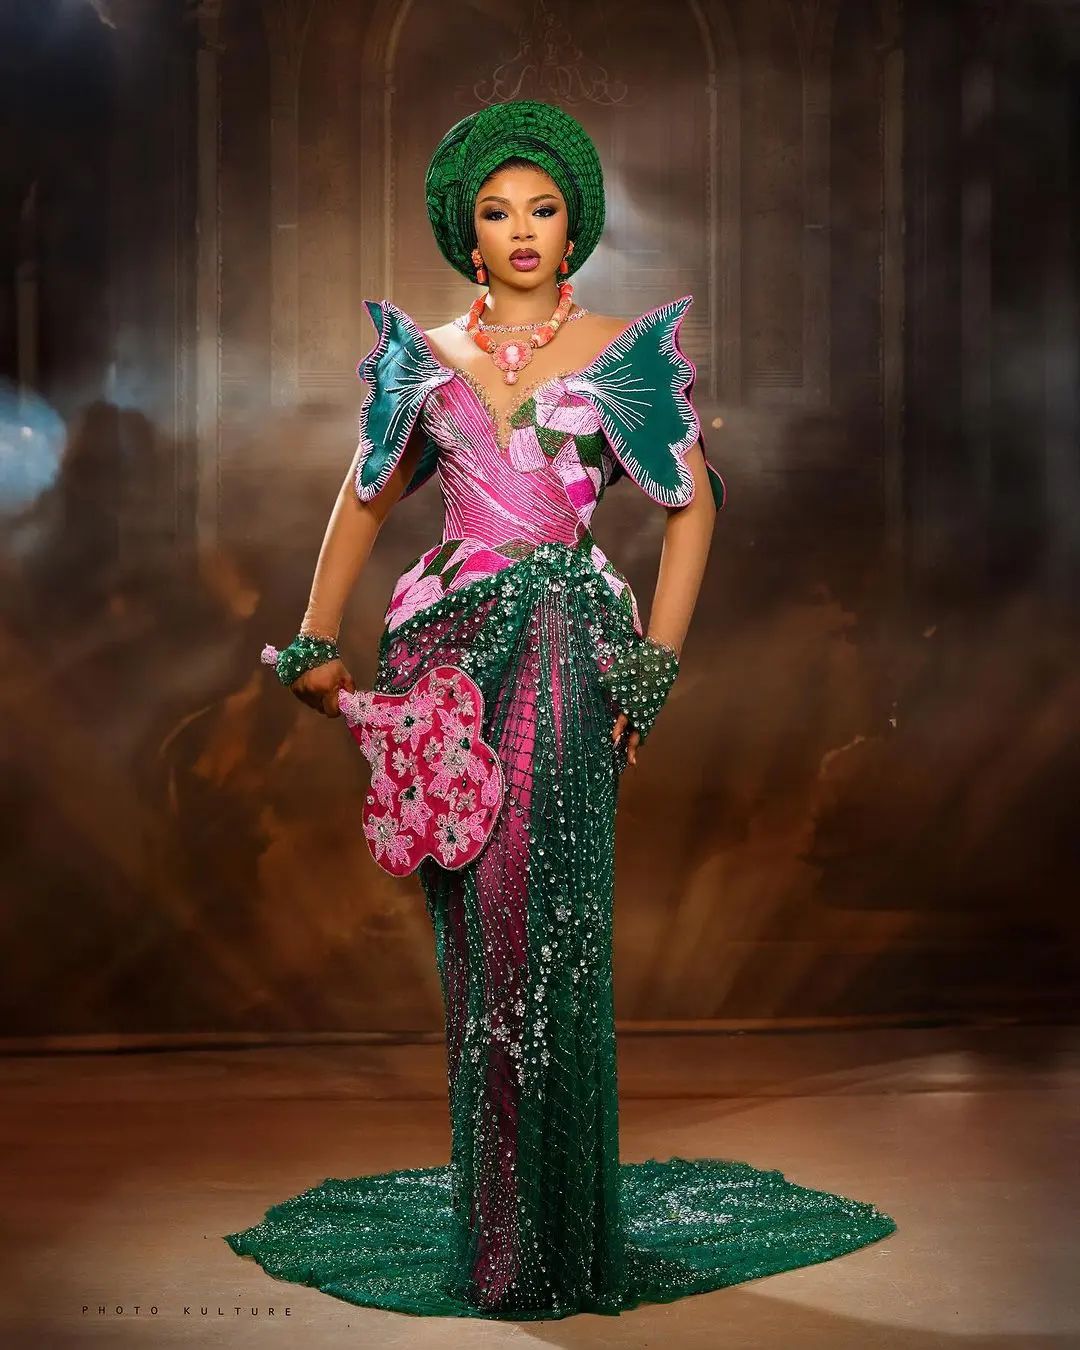 Brides-To-Be! Your Trad Slay Just Got Easier With These Inspos From #AMVCA10 thumbnail